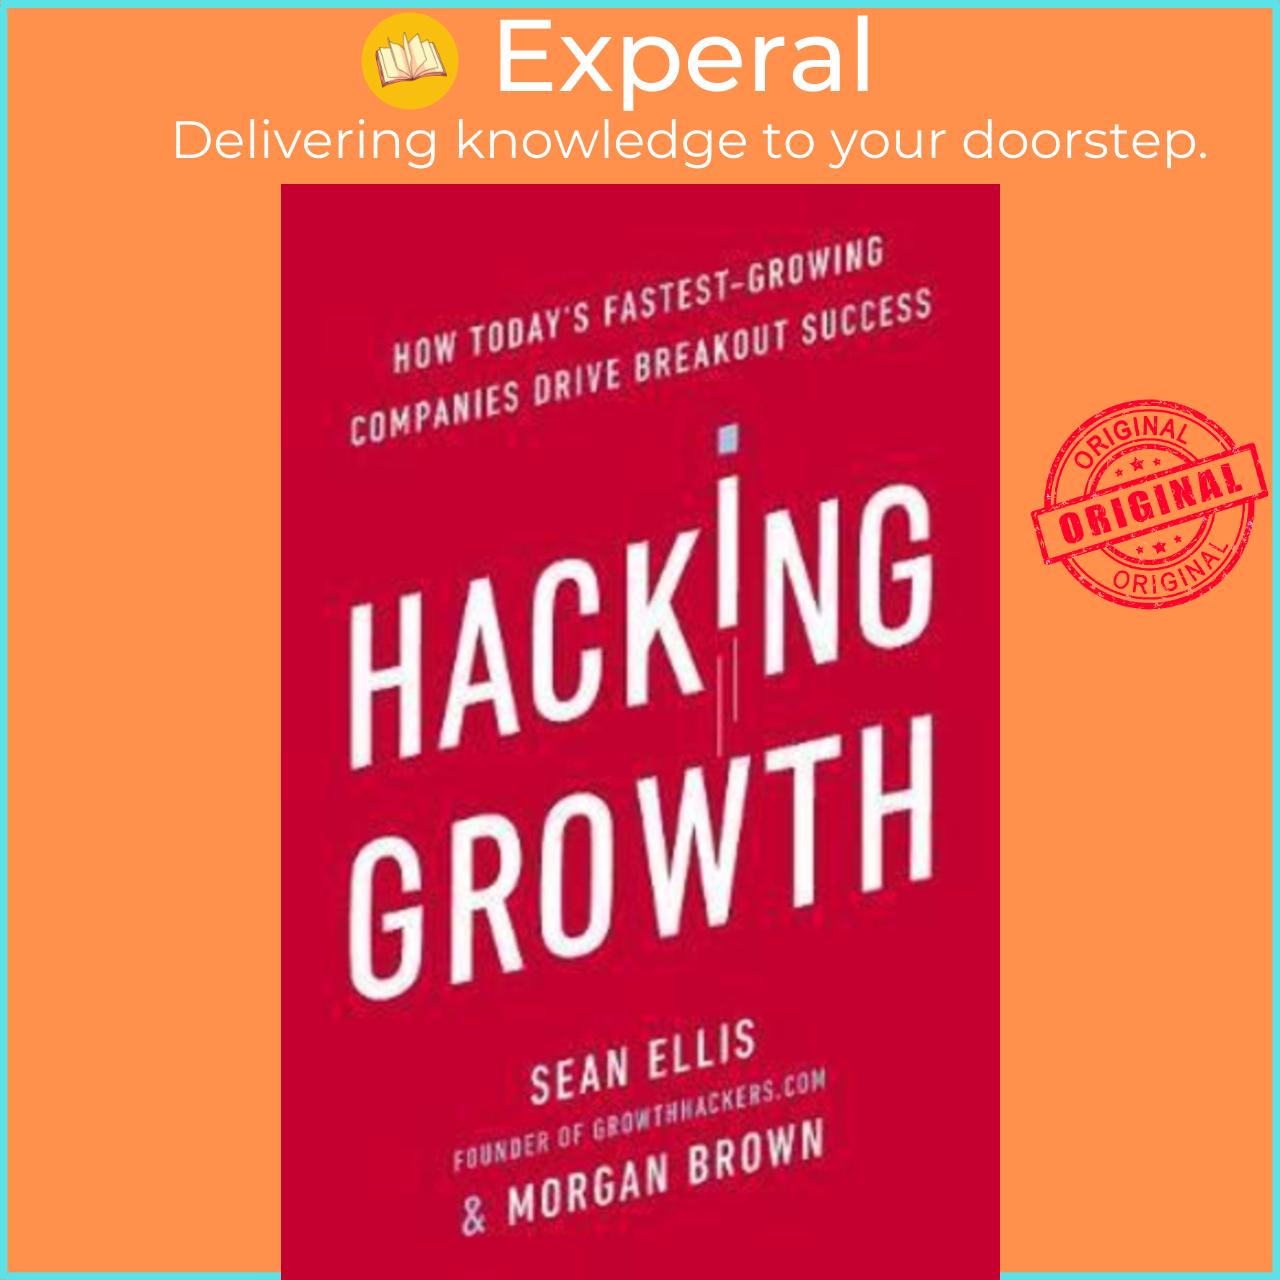 Sách - Hacking Growth : How Today's Fastest-Growing Companies Drive Breakout Succe by Sean Ellis (UK edition, paperback)